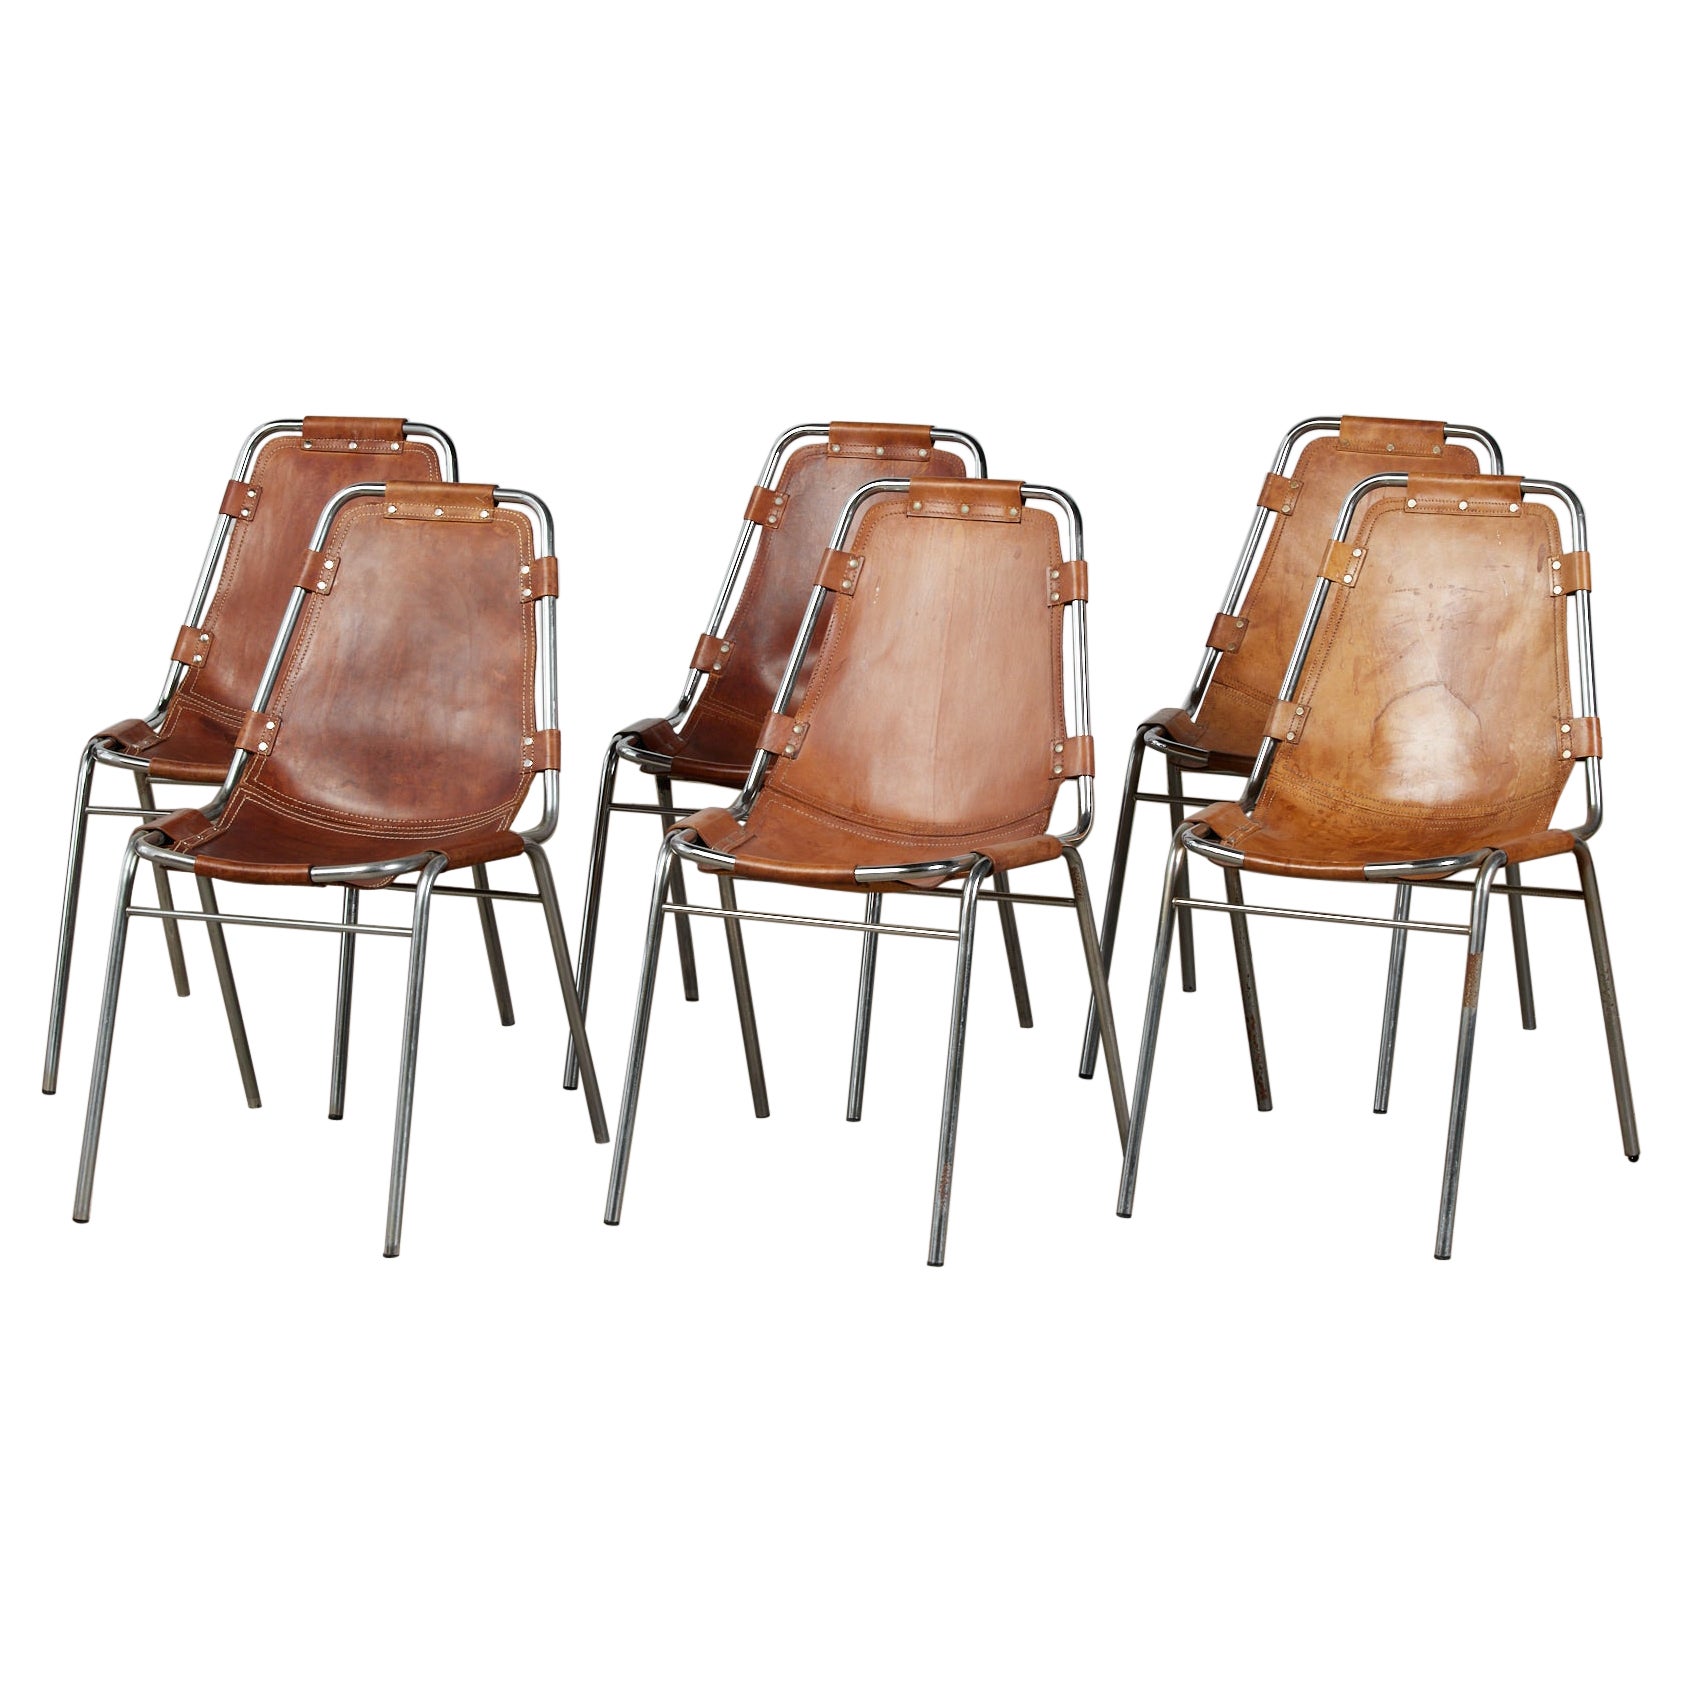 Dal Vera "Les Arcs" Set of Six Chairs Selected by Charlotte Perriand